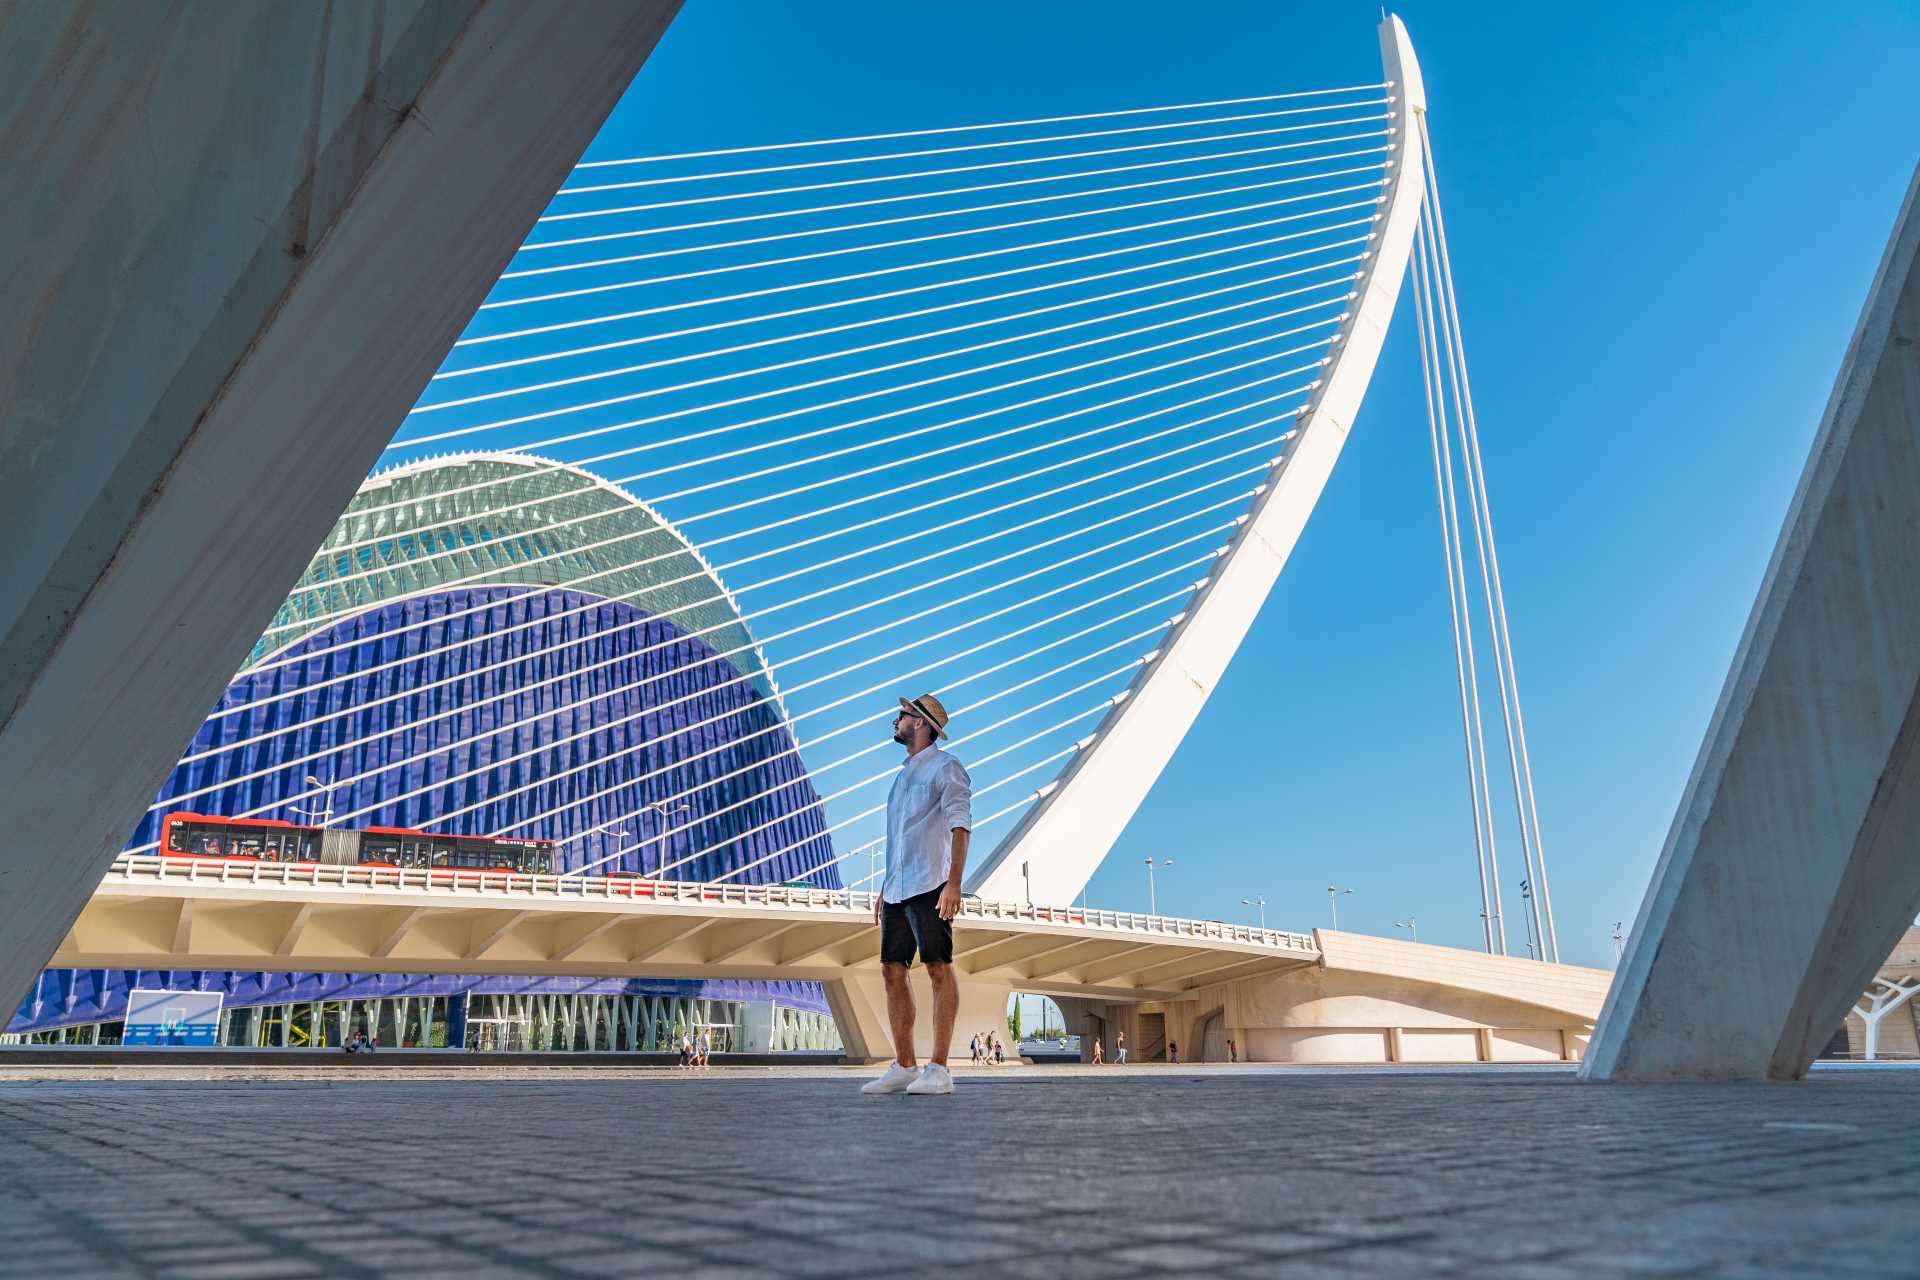 Man standing in front of an artistic building and monument | Featured image for the Modern Spanish Architecture Blog by Clements Clarke Architects.